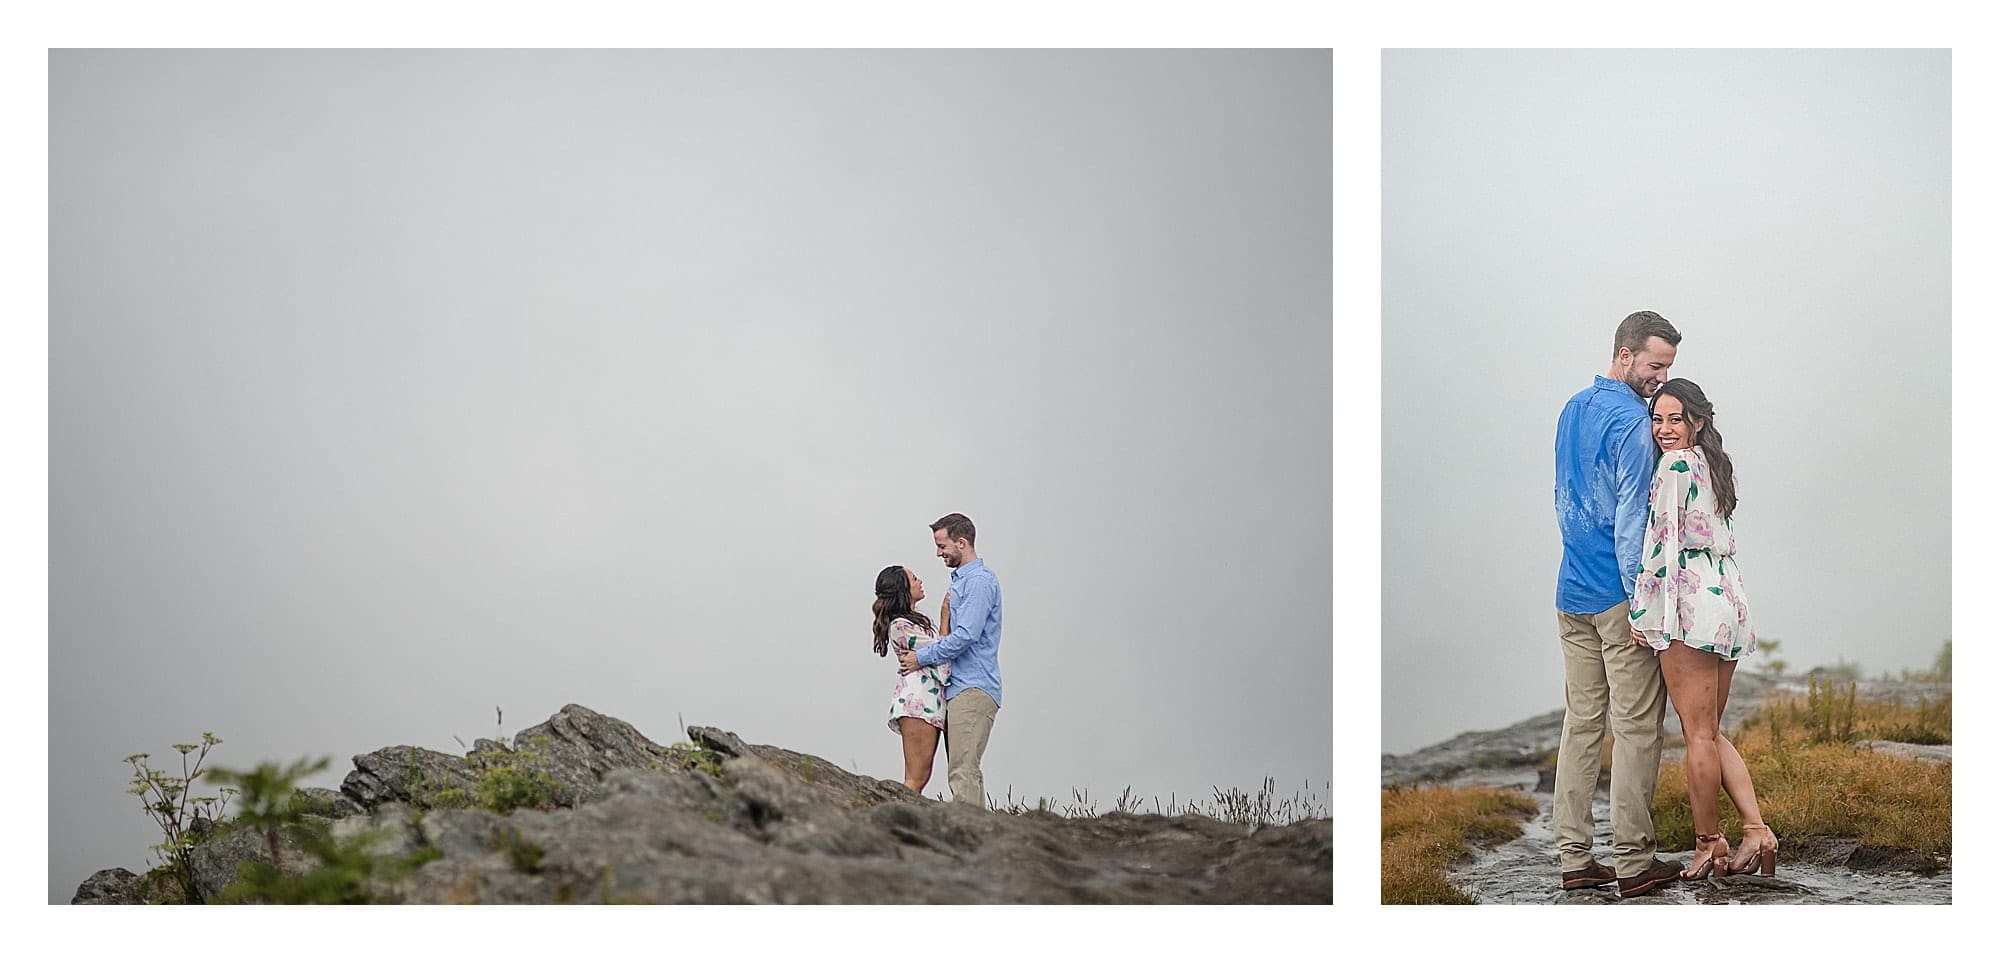 Young couple standing on mountain top holding hands on rainy cloudy day